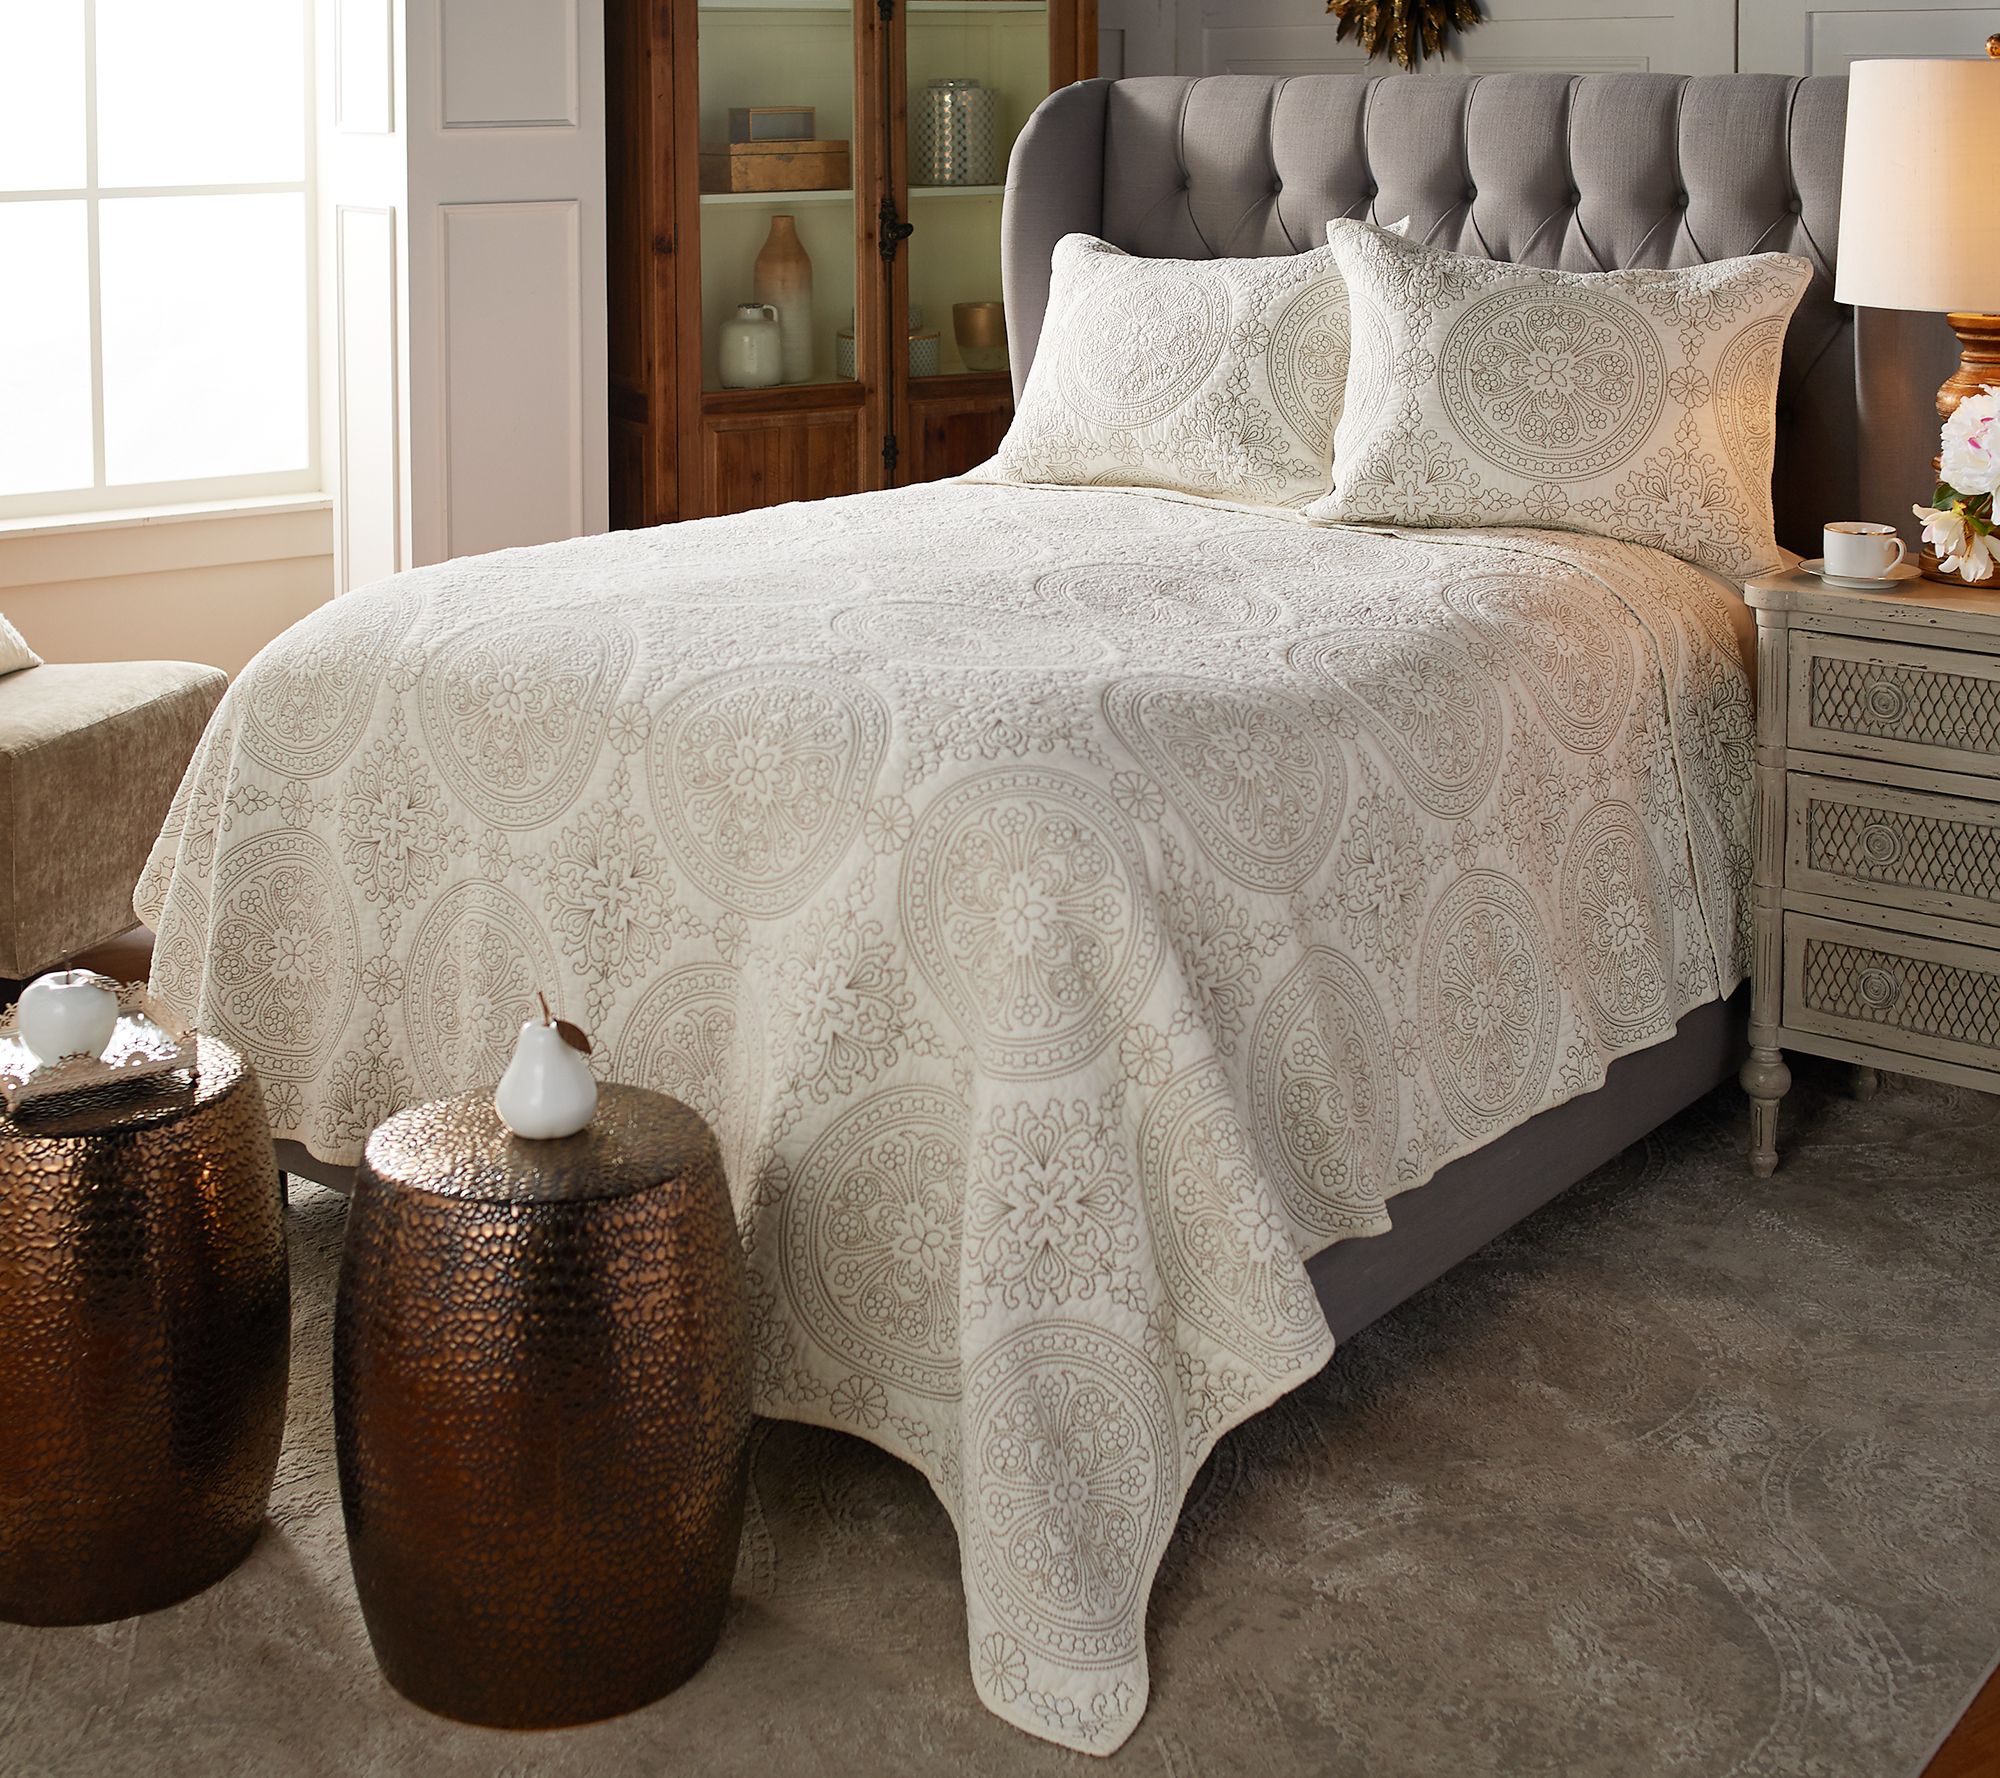 Bedding Sets For The Home Qvc Com